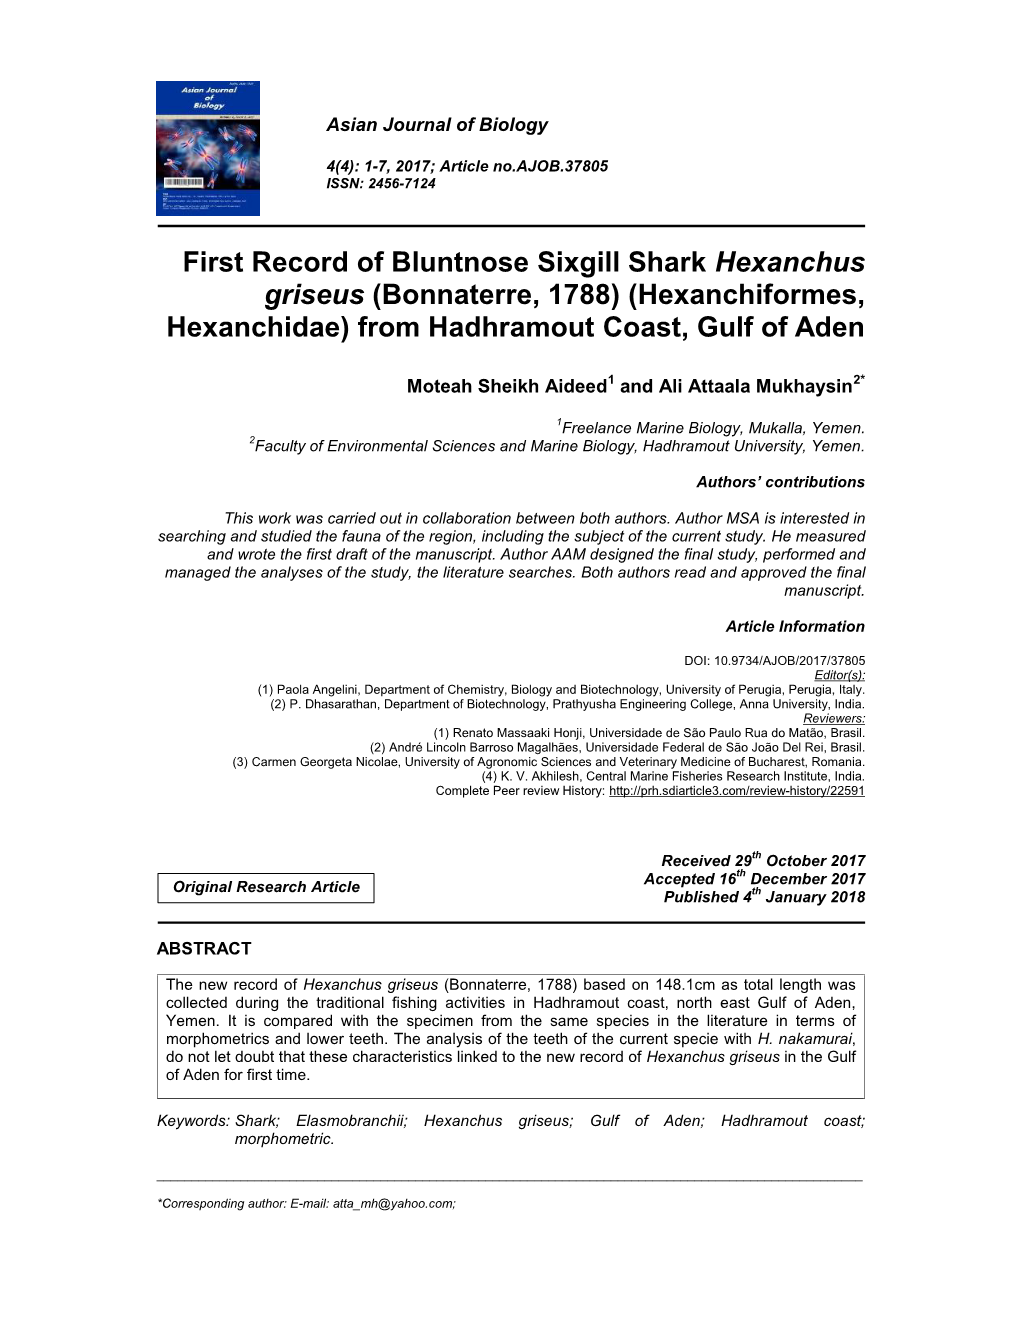 First Record of Bluntnose Sixgill Shark Hexanchus Griseus (Bonnaterre, 1788) (Hexanchiformes, Hexanchidae) from Hadhramout Coast, Gulf of Aden